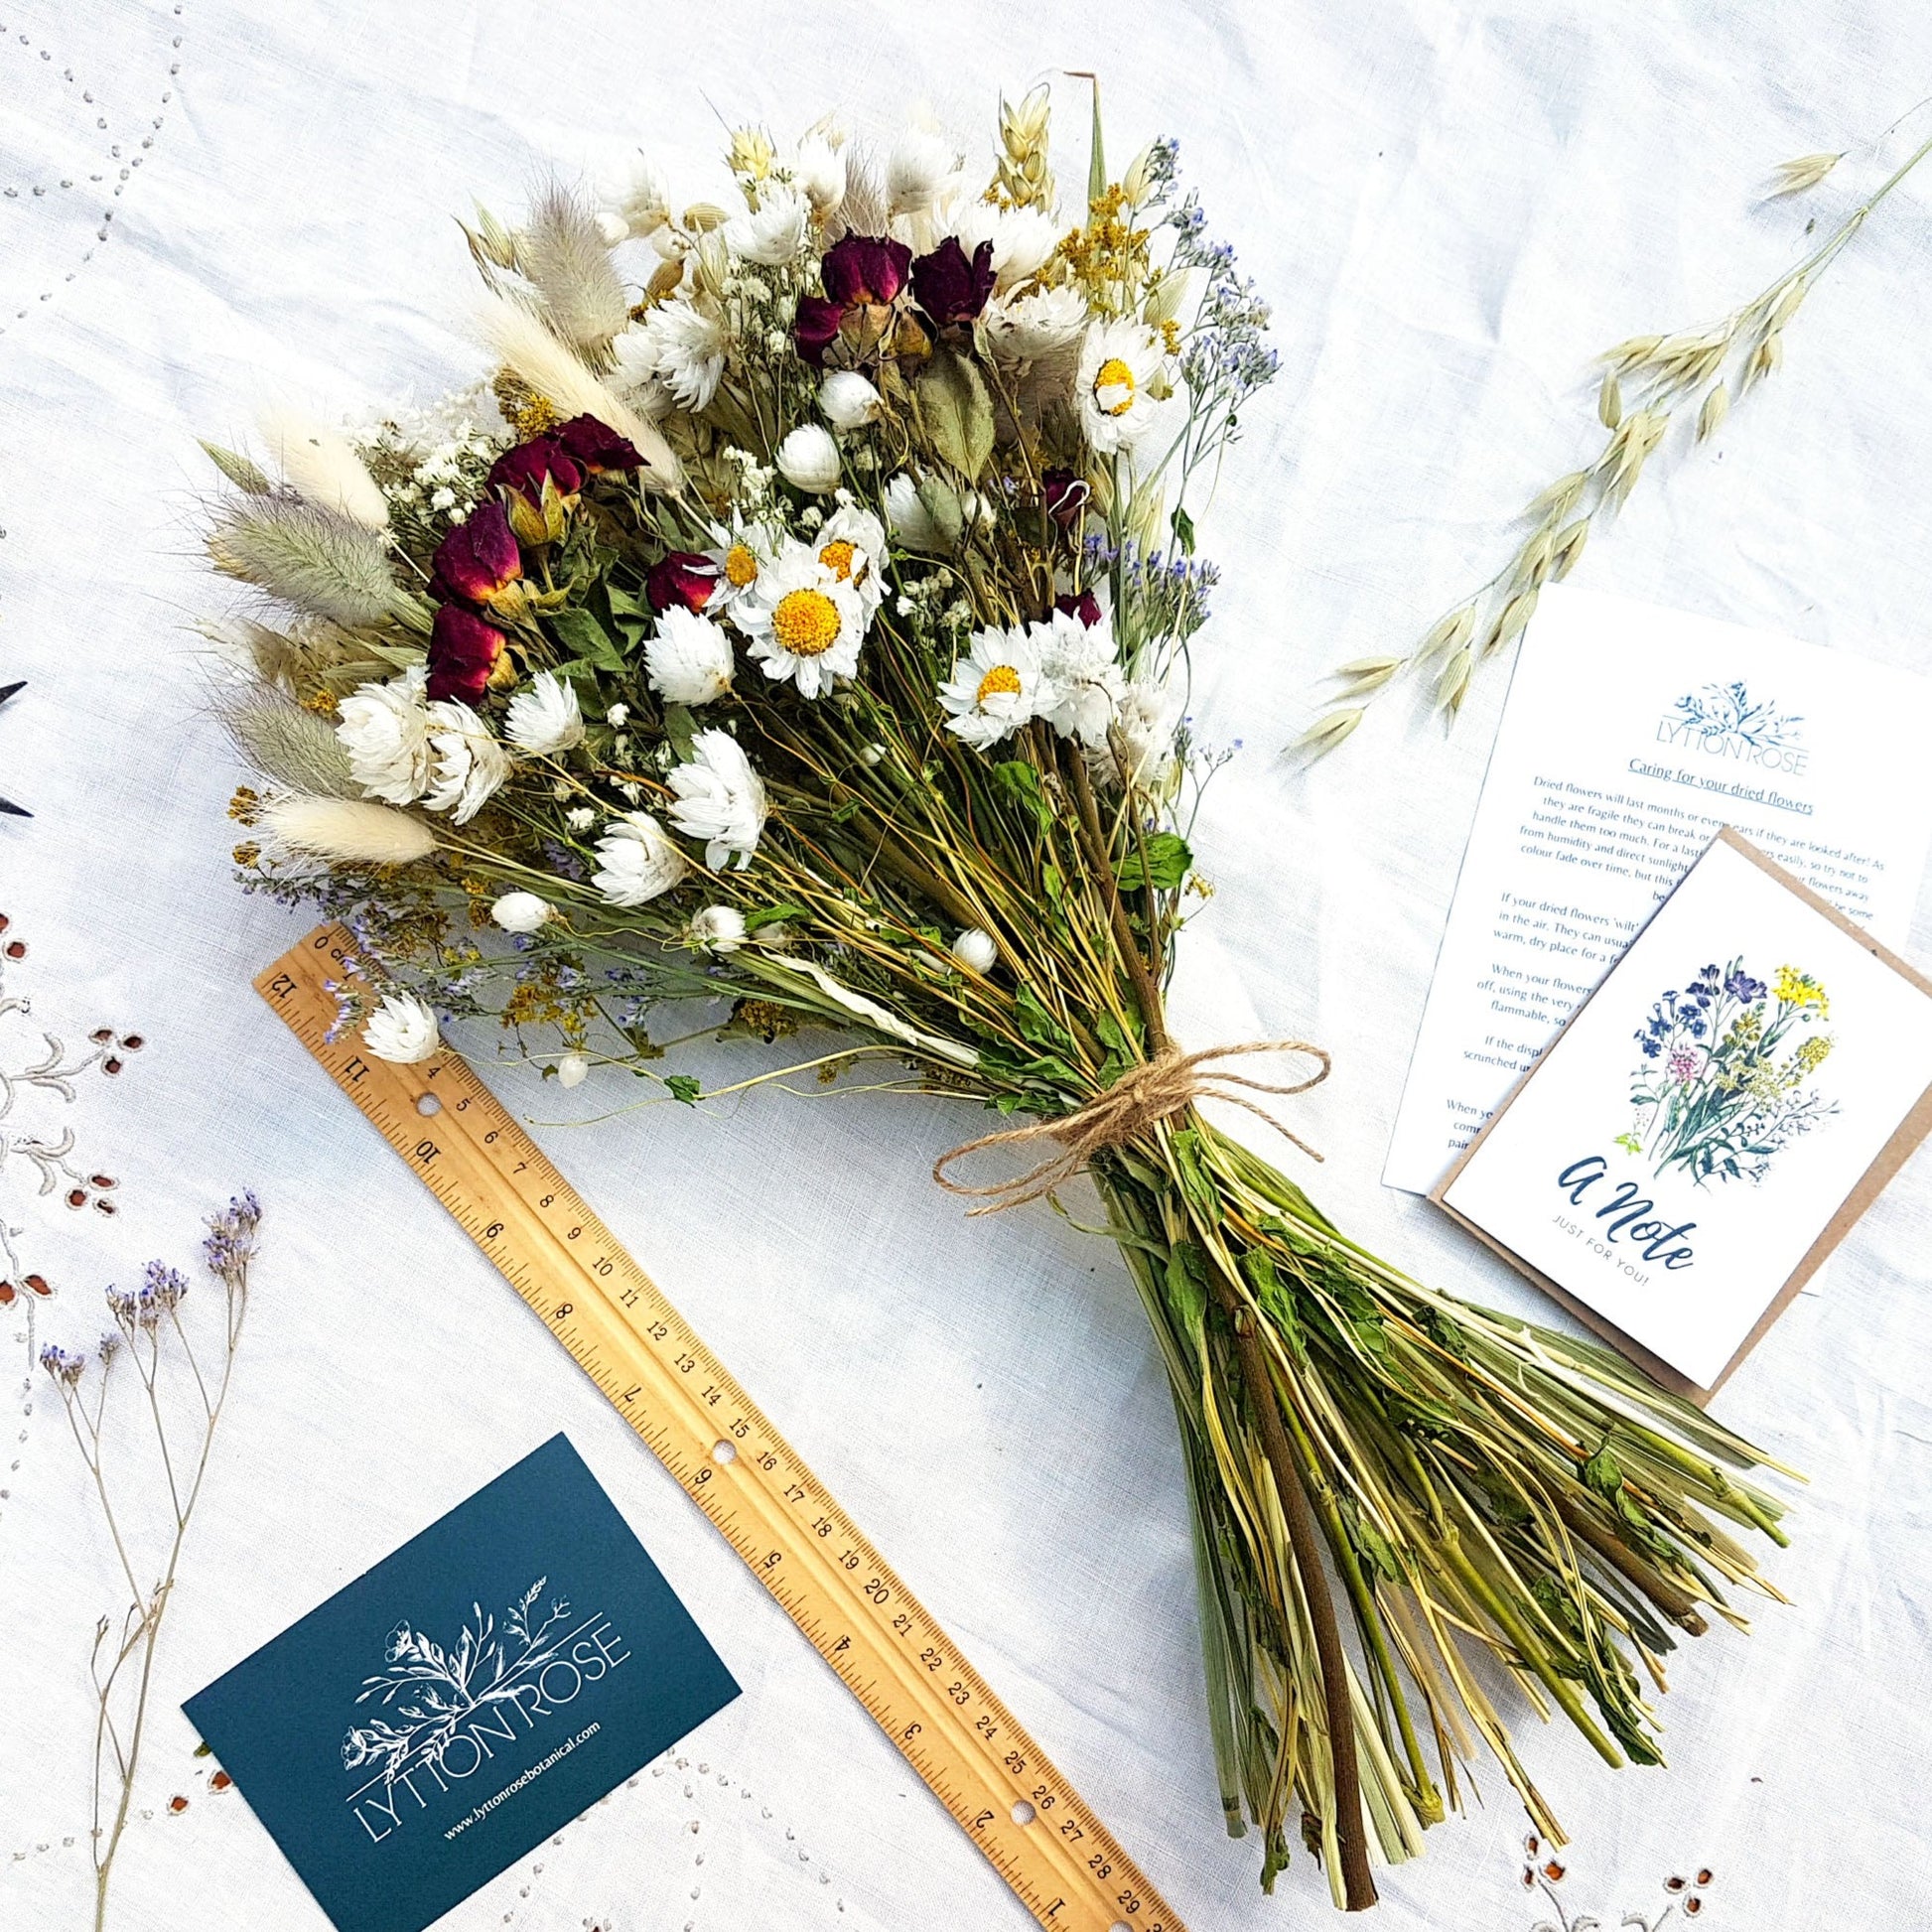 The dried flower bouquet is laid on a white linen background next to a twelve inch ruler. You can see it is a few inches longer than the ruler. 